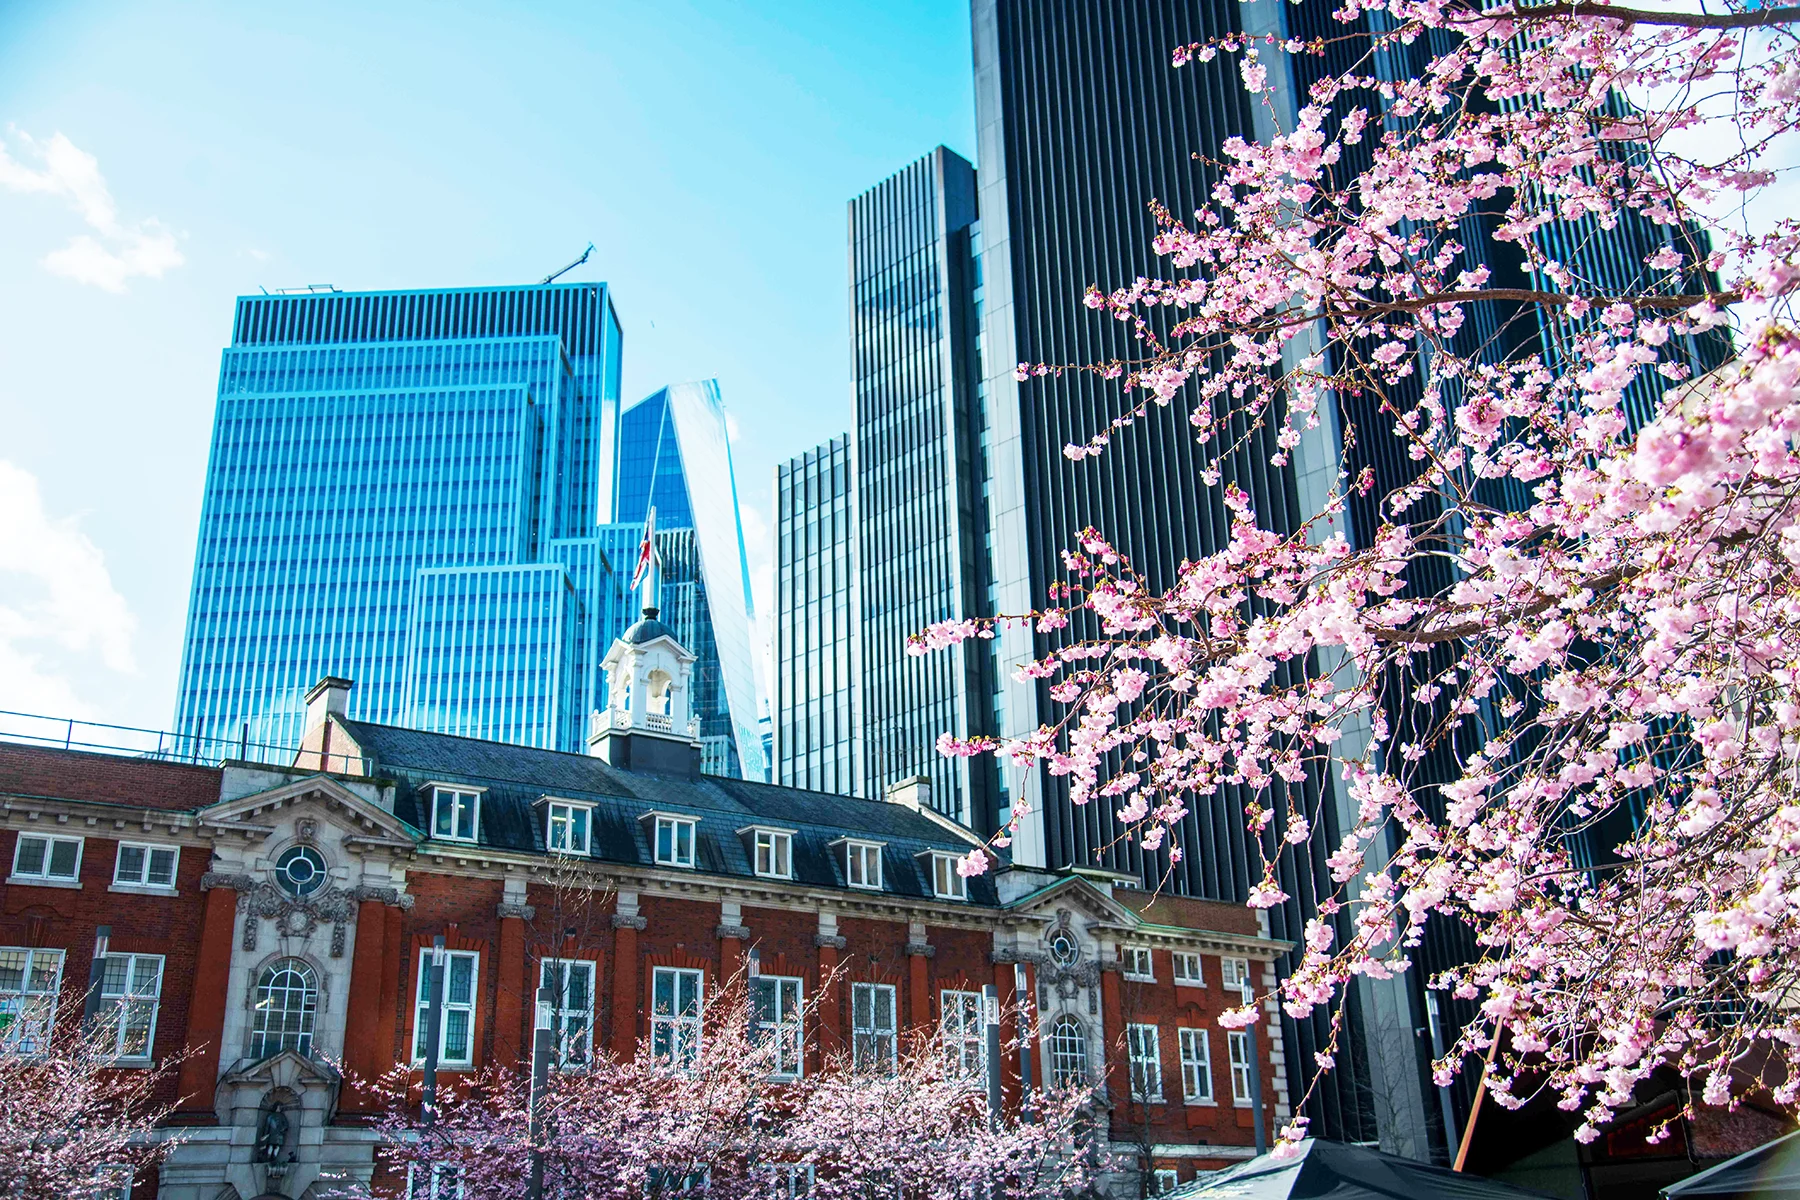 A view of the city of London with skyscrapers in the background and trees with pink blossom in the foreground. 